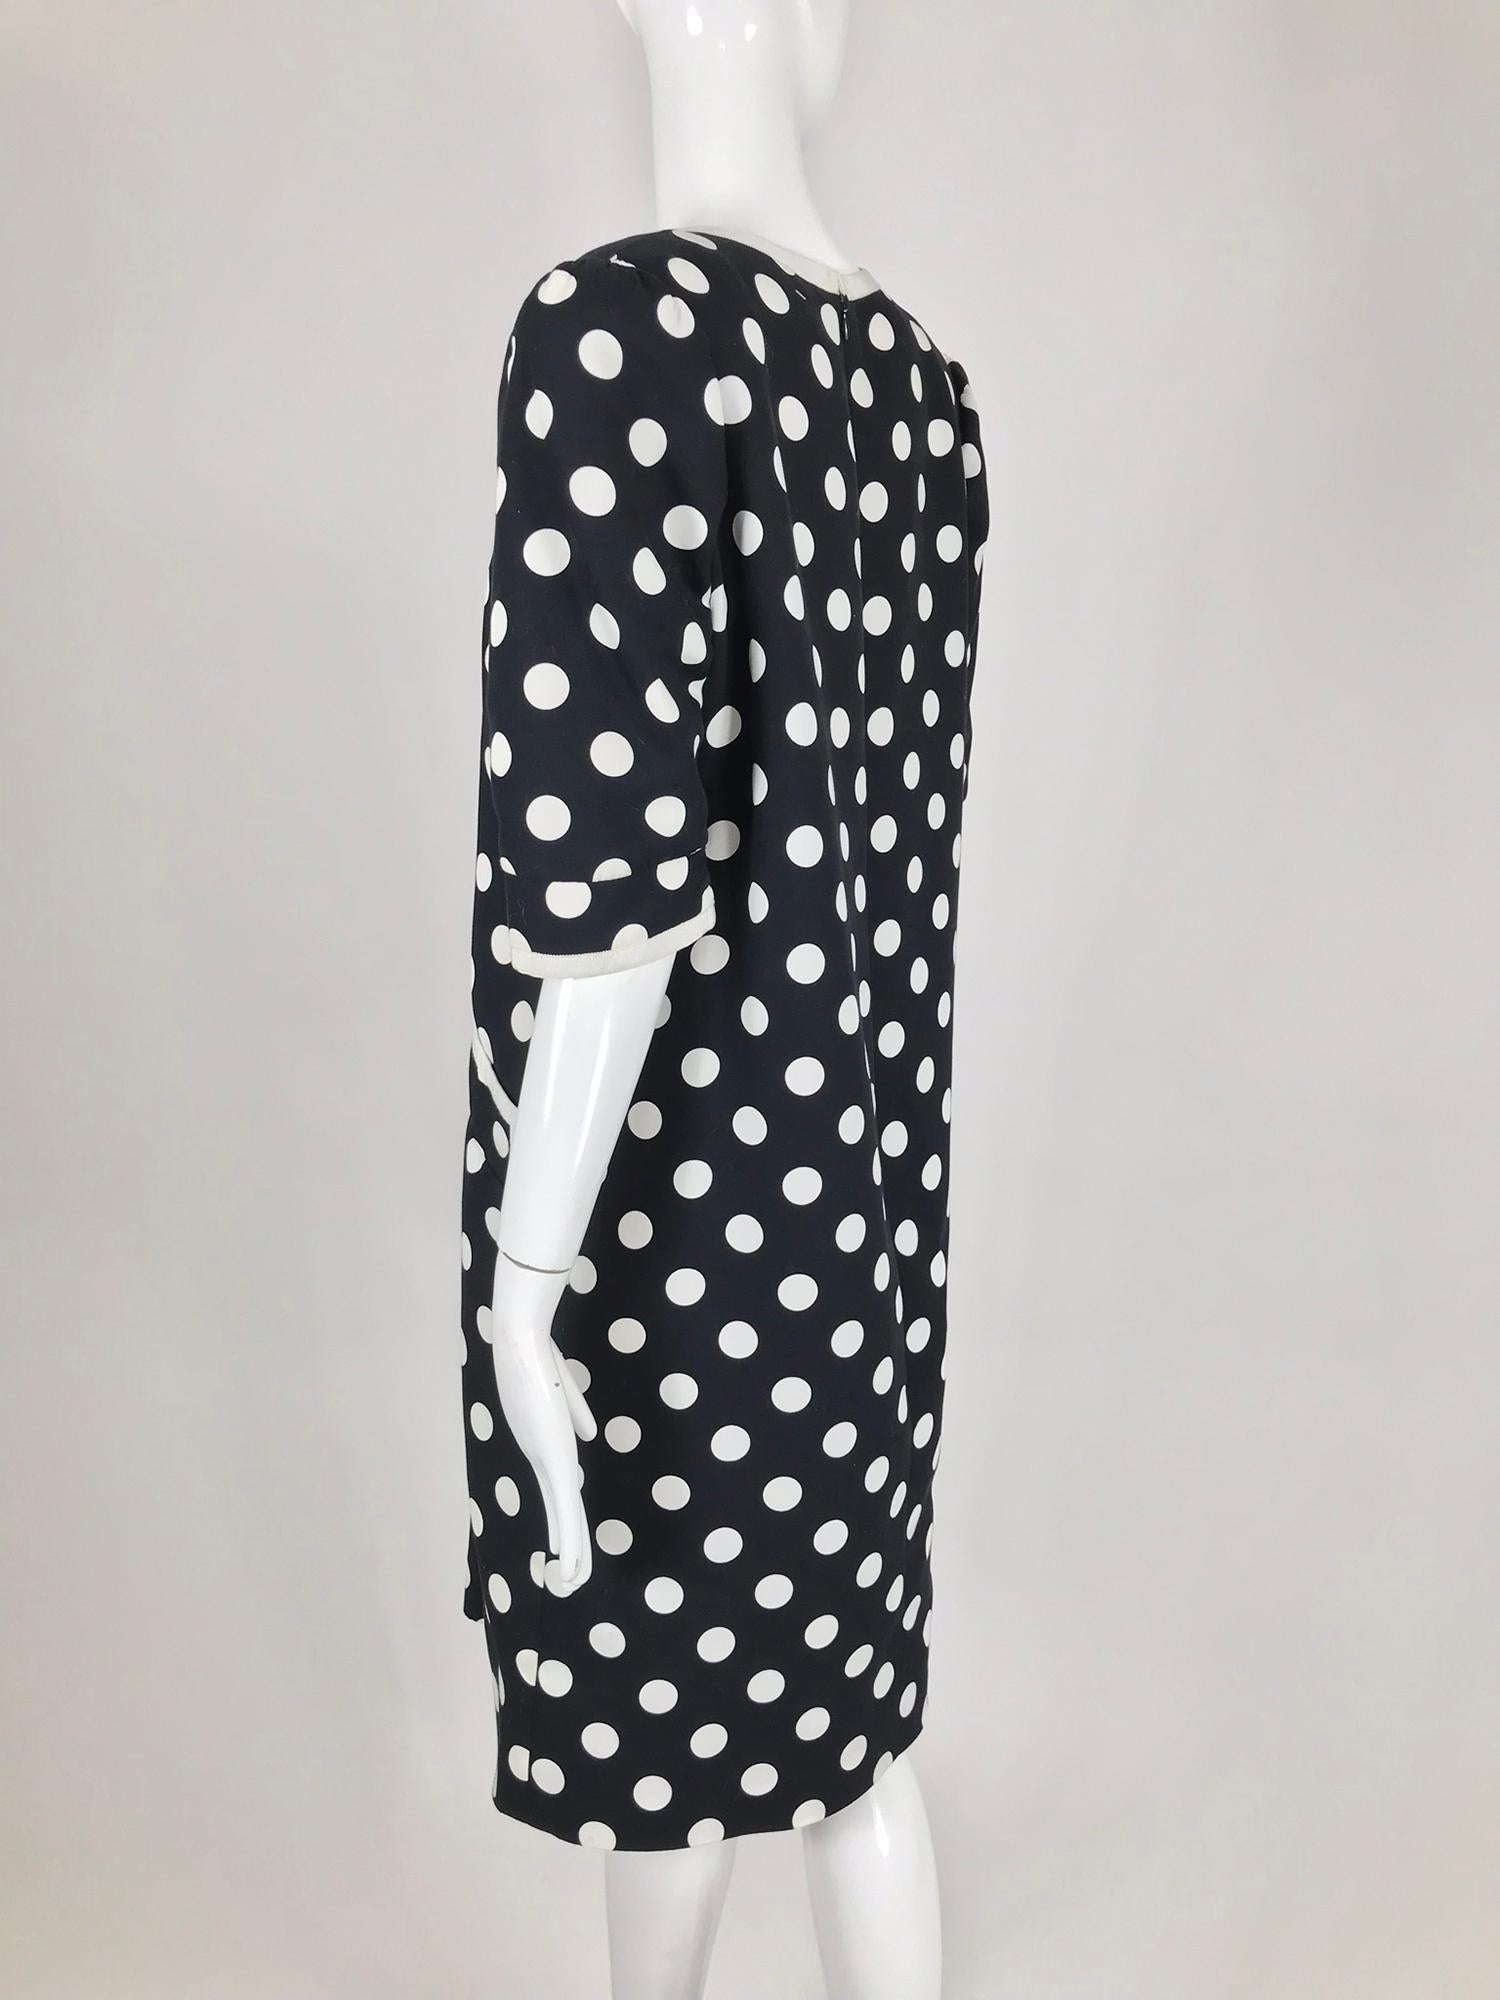 Givenchy Couture Black and White Cotton Polka Dot Day Dress 1980s For Sale 6